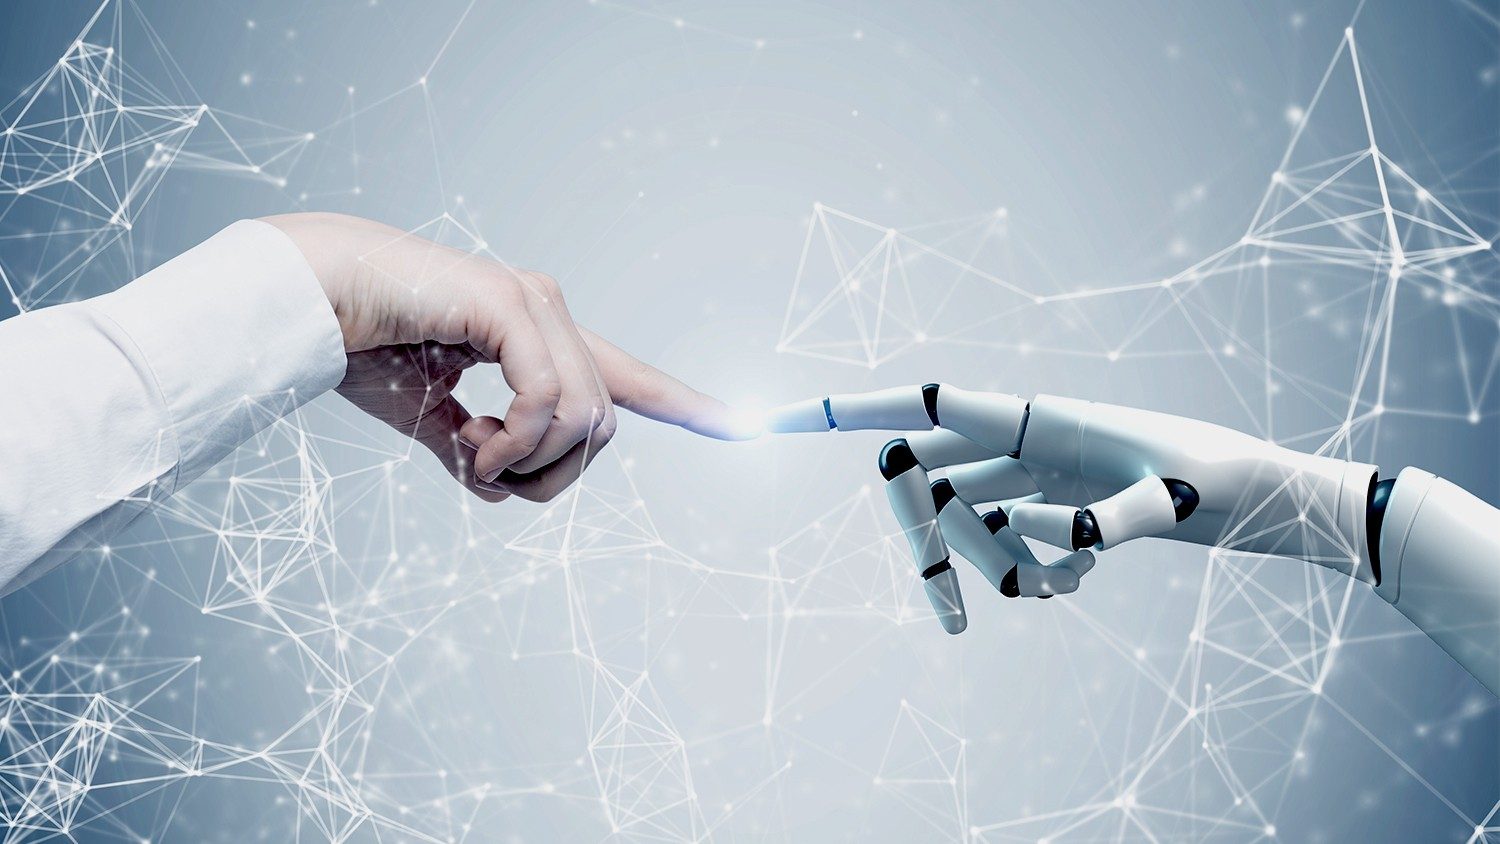 The WCC is concerned with the unregulated development of artificial intelligence